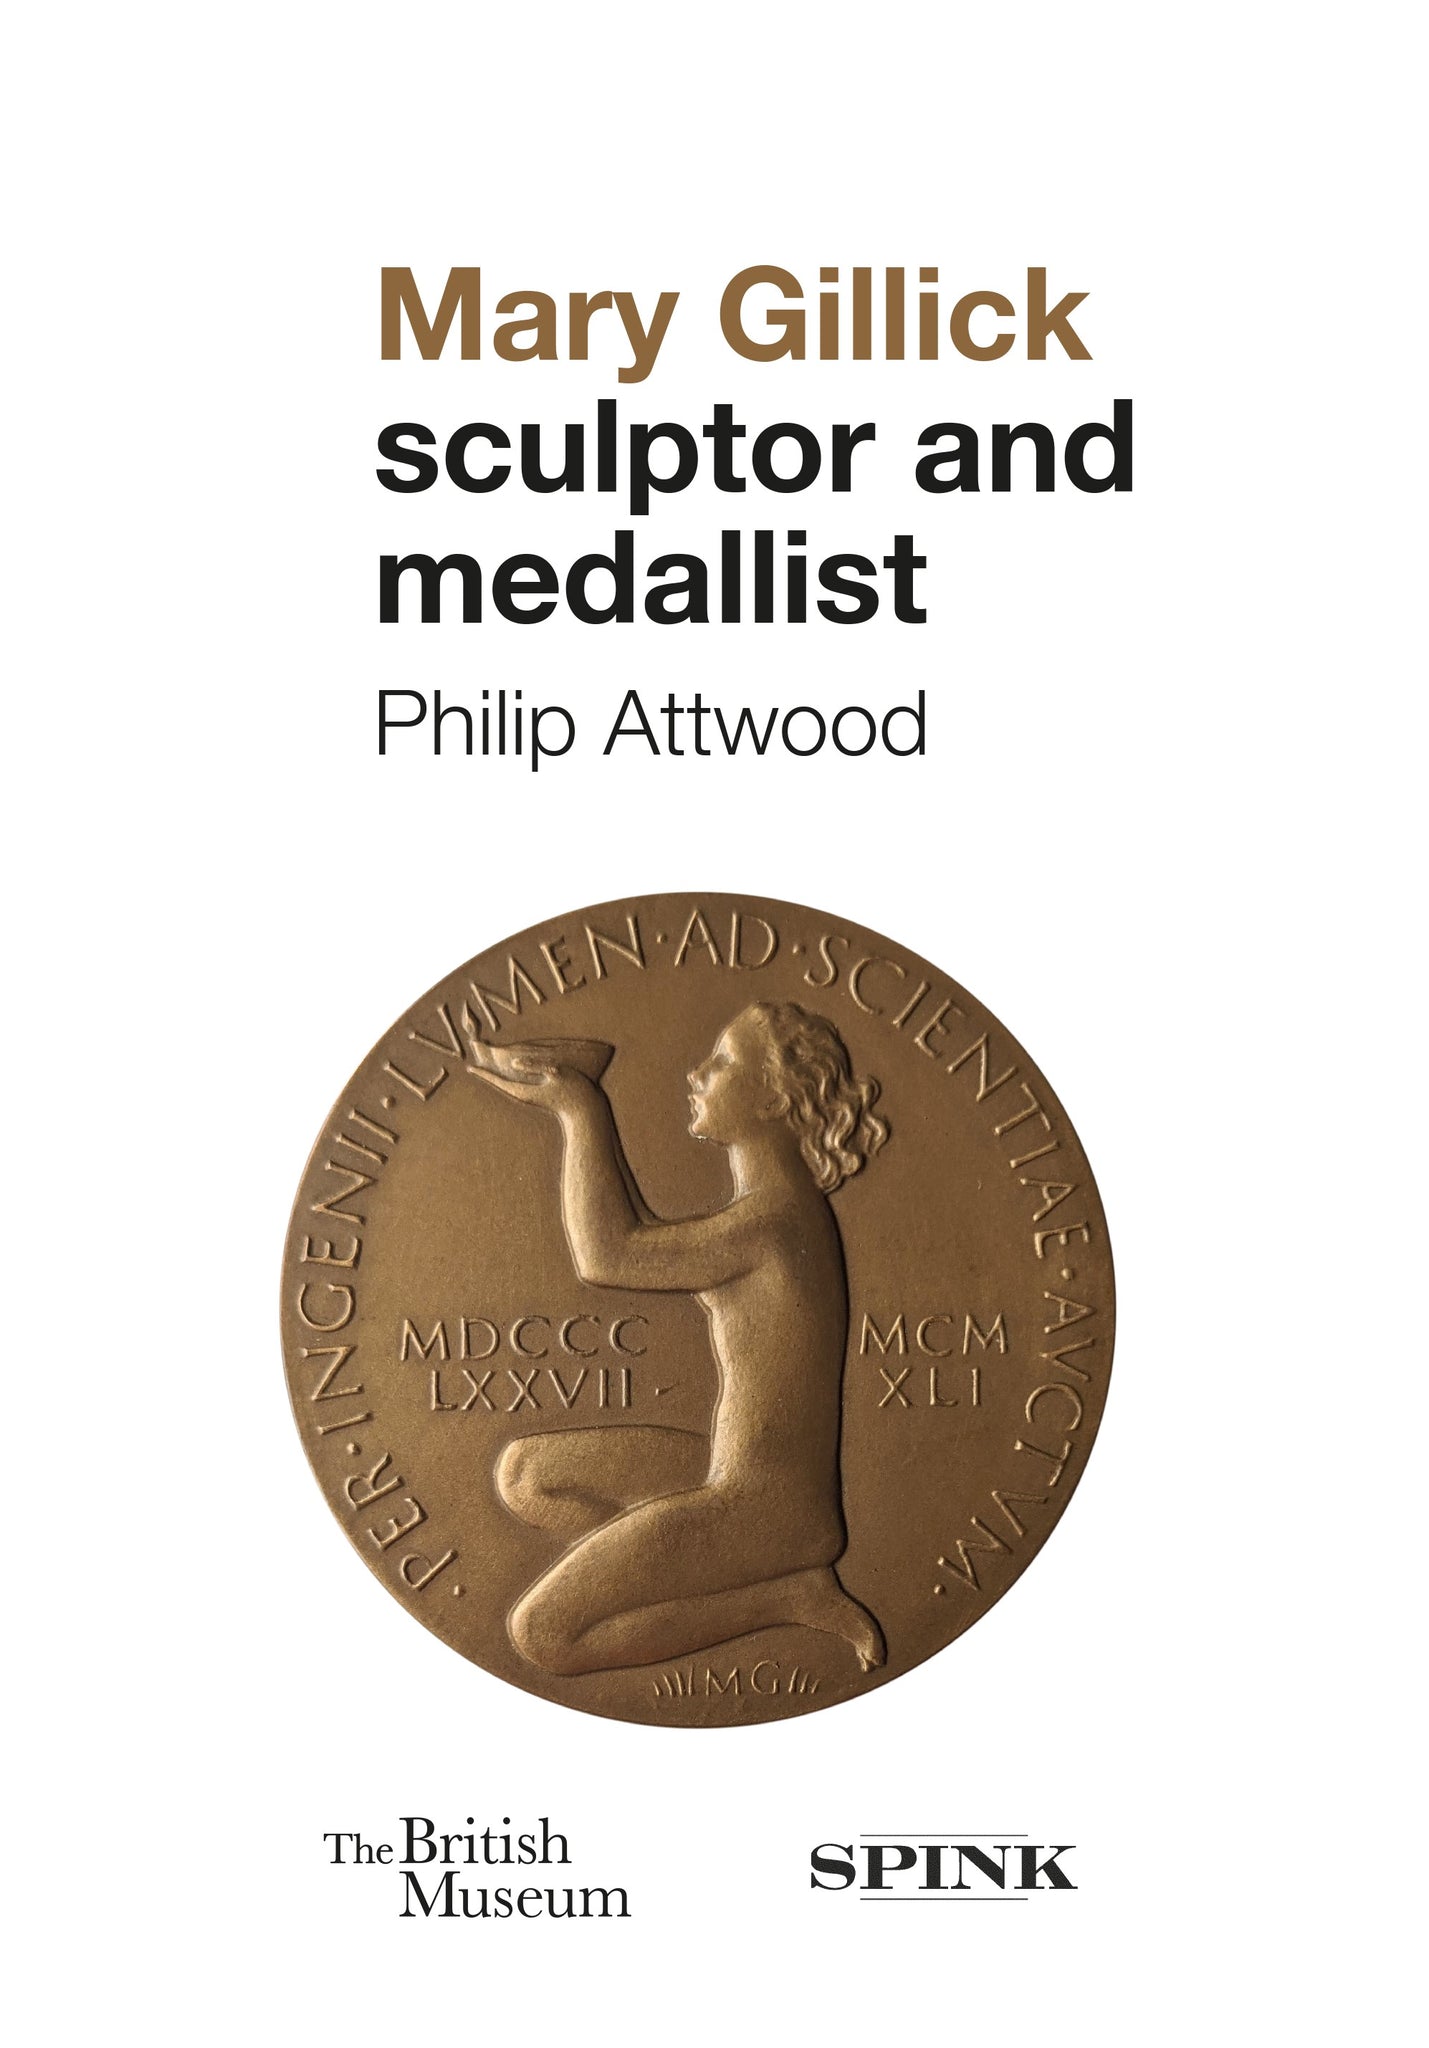 Mary Gillick: Sculptor and Medallist by Philip Attwood (downloadable PDF)